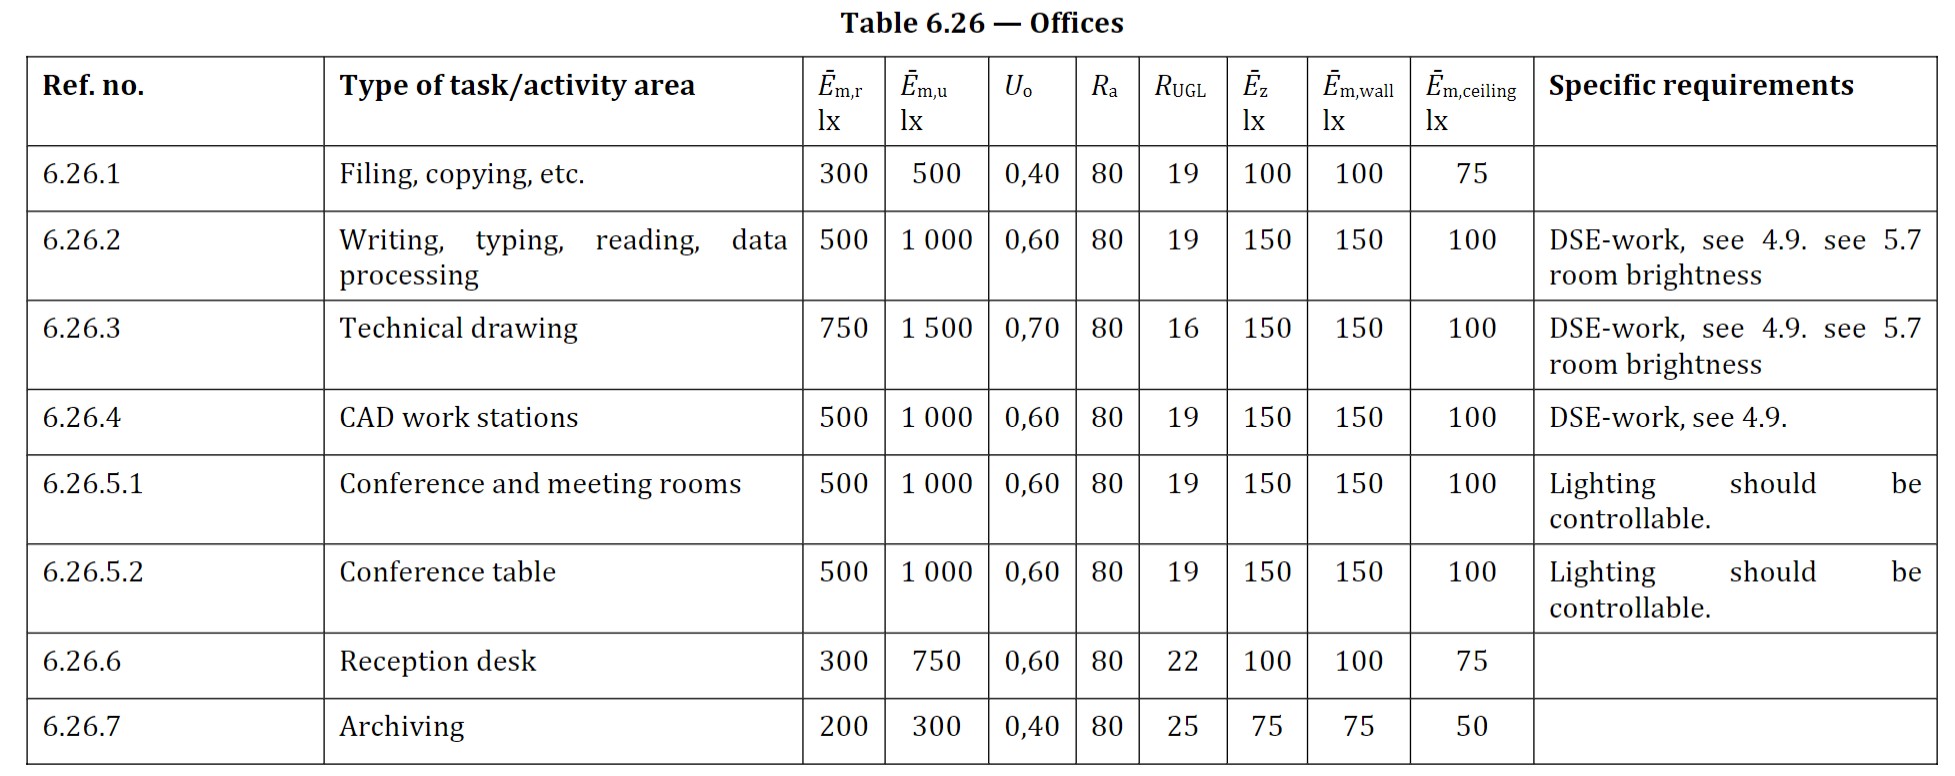 Schedule of lighting requirements for office